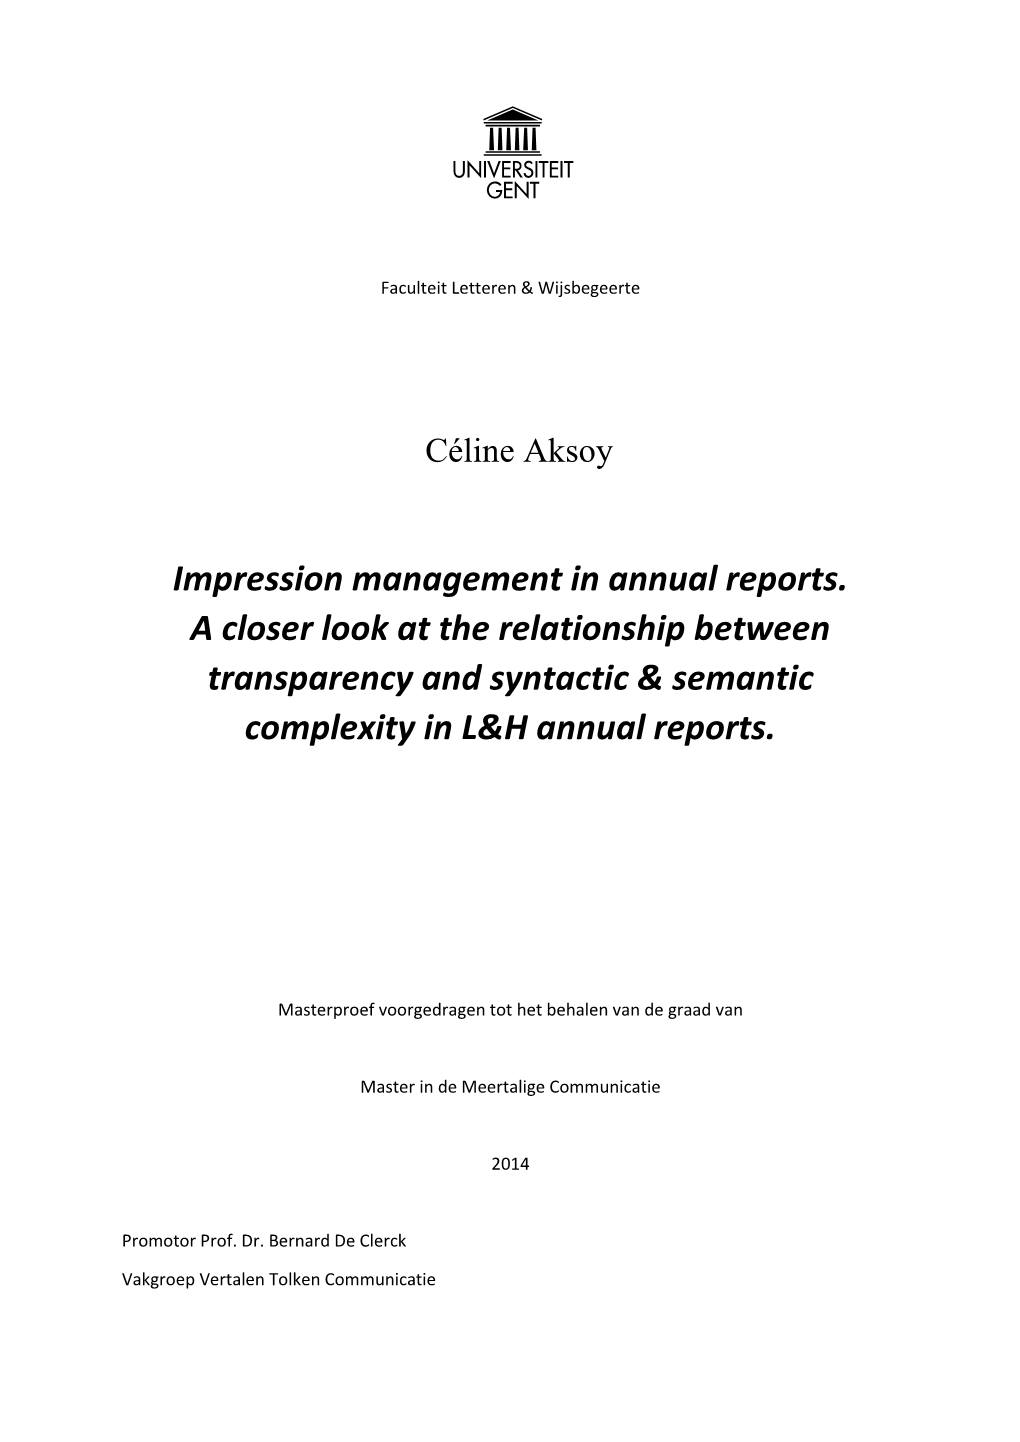 Impression Management in Annual Reports. a Closer Look at the Relationship Between Transparency and Syntactic & Semantic Complexity in L&H Annual Reports